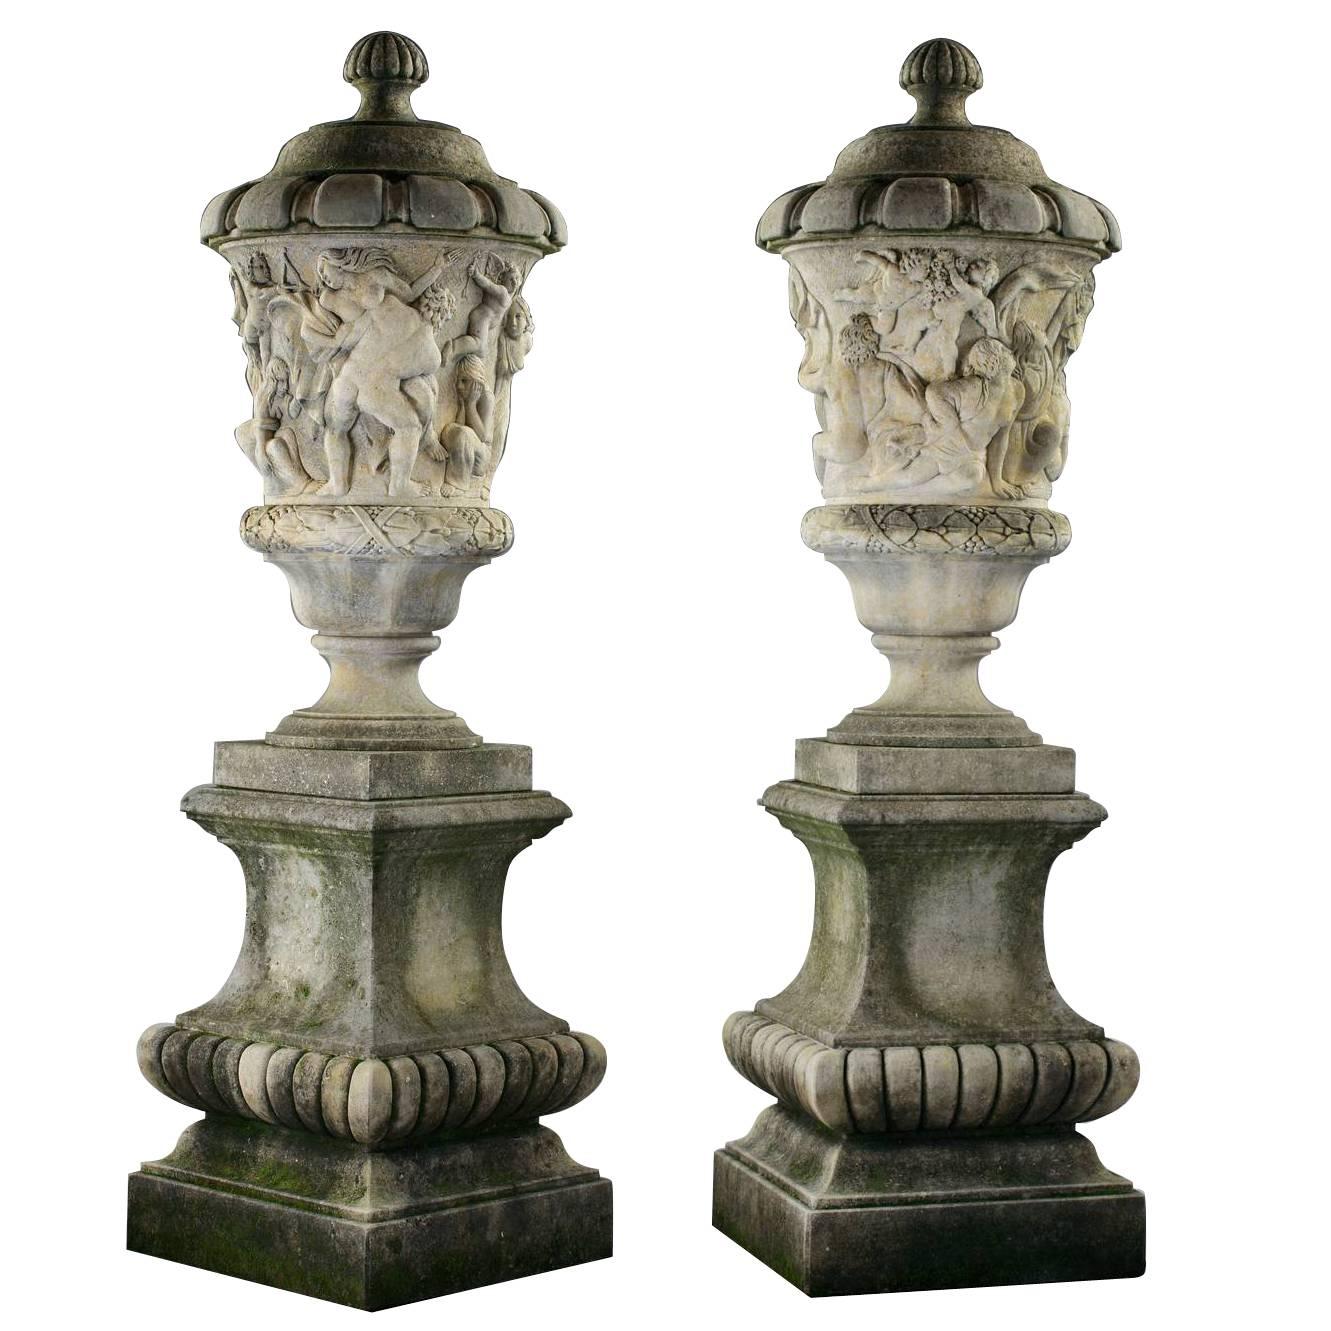 Pair of Large Italian Sculpted Stone Lidded Urns